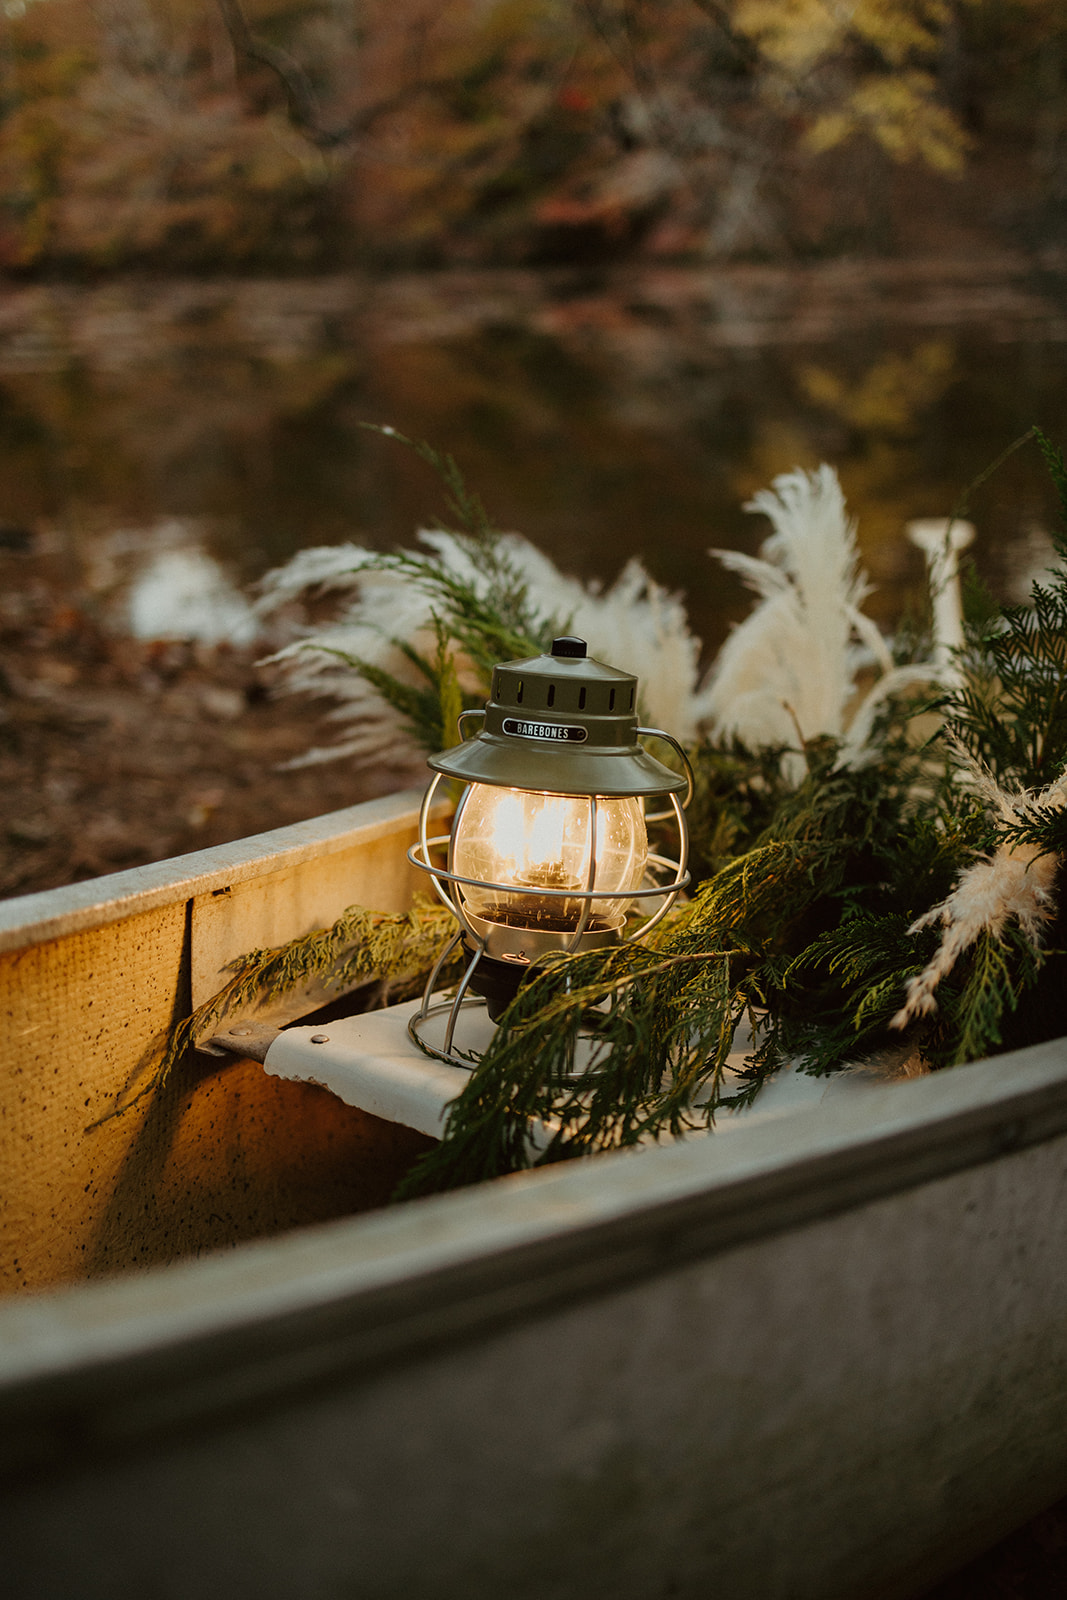 the lantern and wedding decorations for the elopement in Georgia